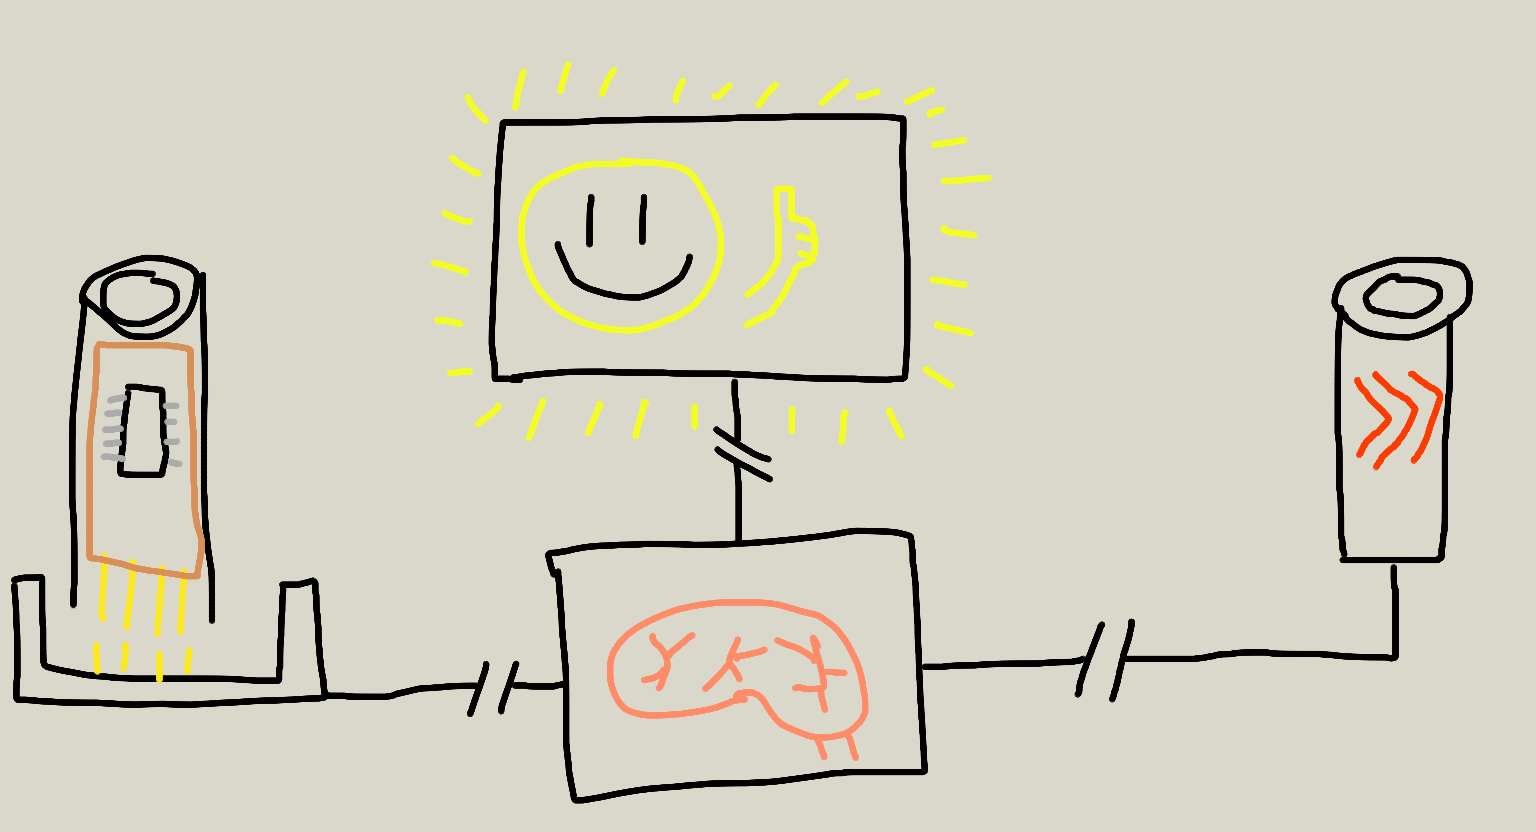 still a very rough sketch, depicting what's meant to be a button with four yellow leads connecting to a socket, also with four connectors. The button has a rectangle with a microcontroller on it. The socket is connected to a rectangle with a brain into it, which is connected to another button sans socket, and a rectangle with a smiley face giving a thumbs up inside of it.